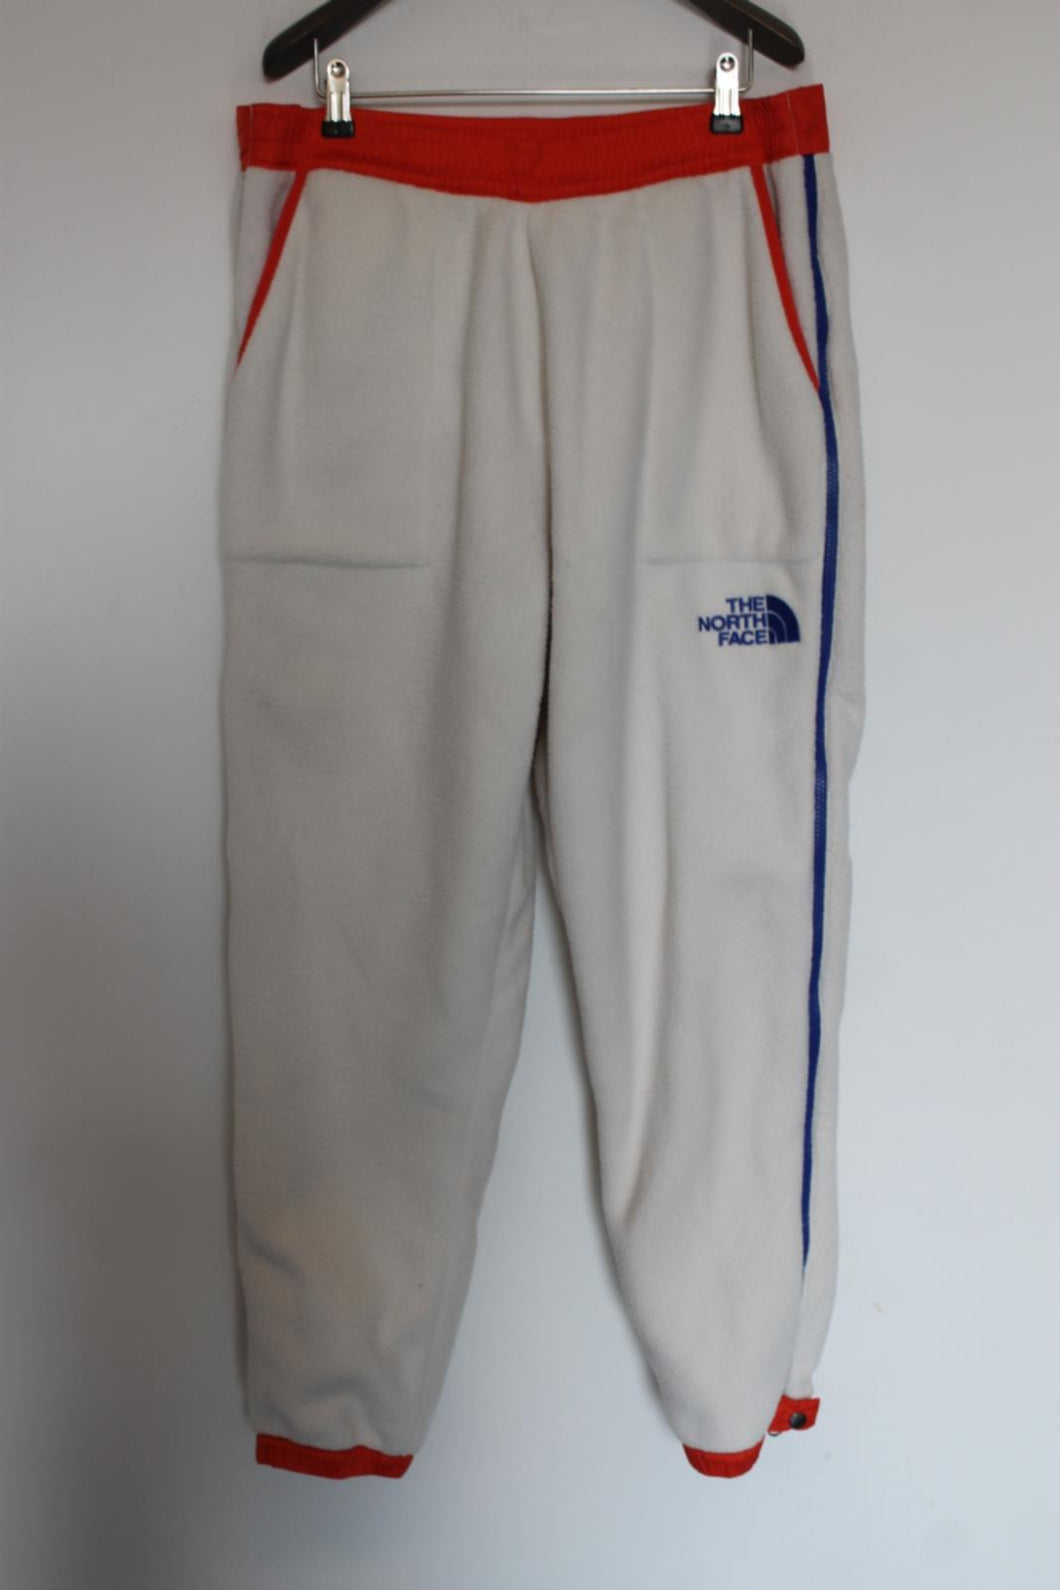 THE NORTH FACE Men's White Fleece Jogger Track Bottoms Trousers Size L BNWT